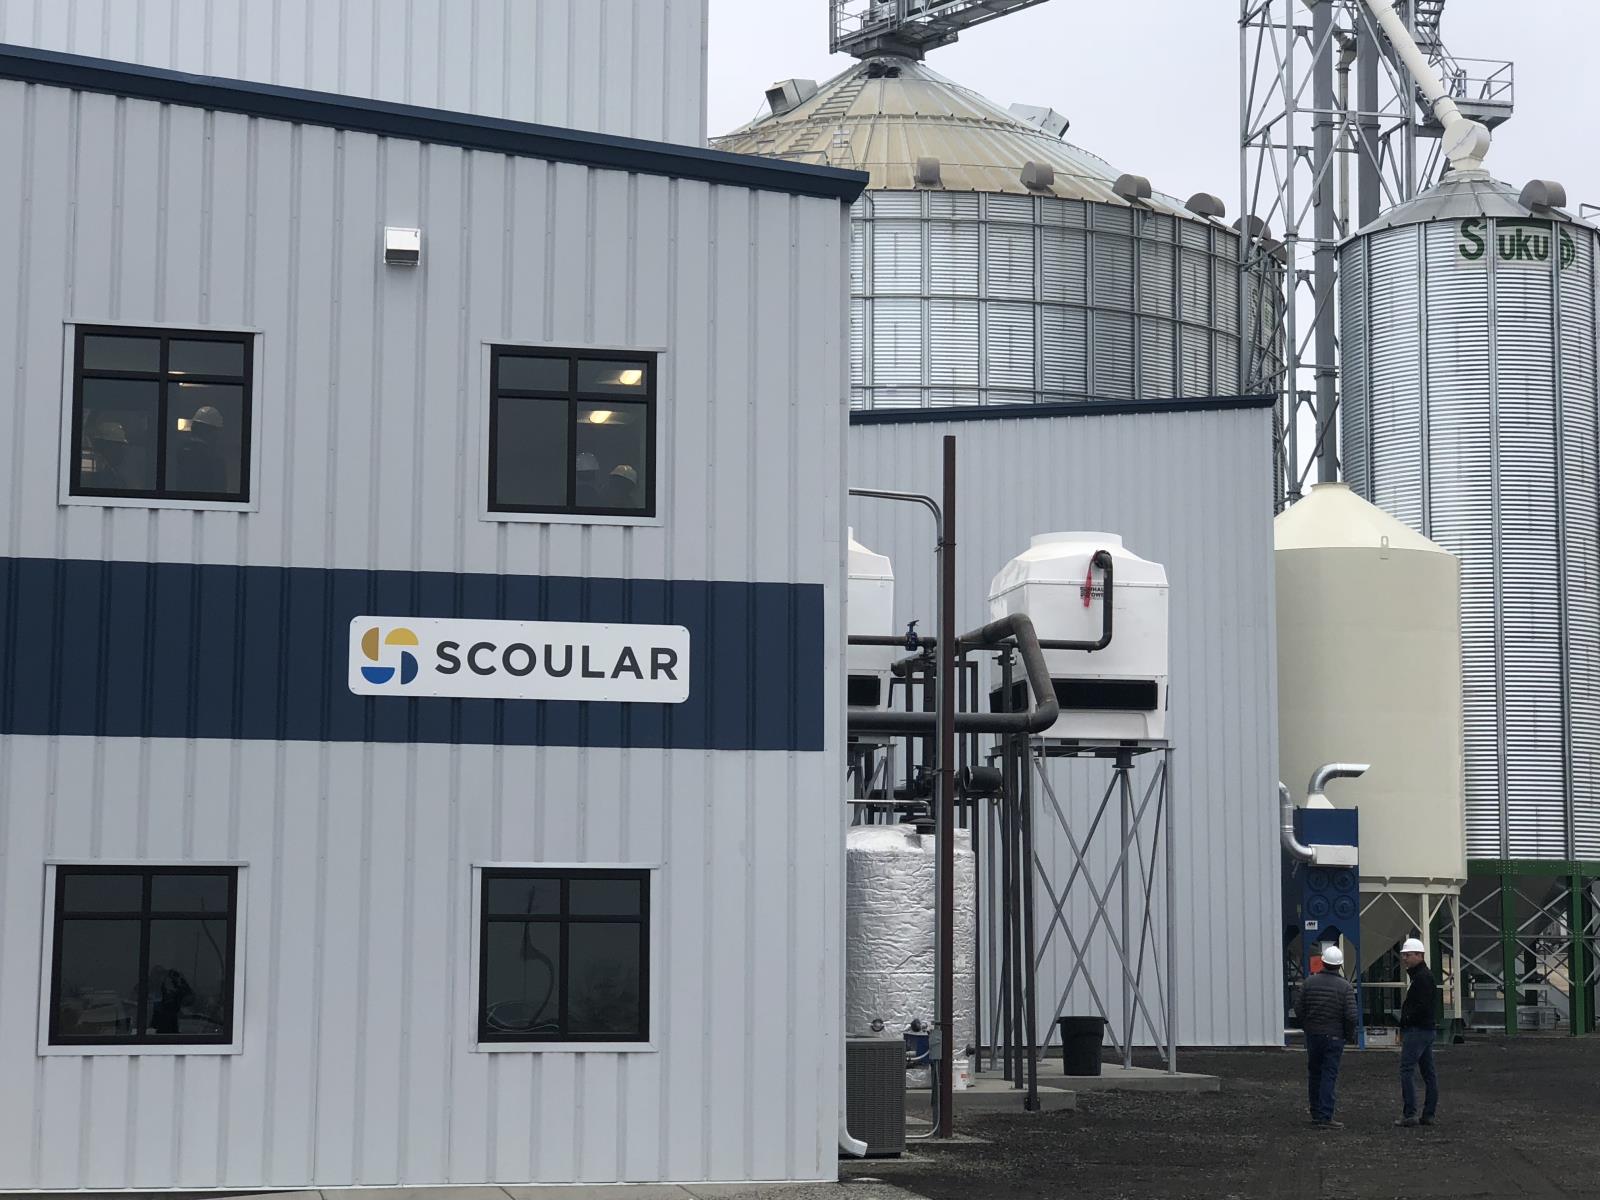 A ribbon-cutting ceremony was held Dec. 7 for Scoular’s new barley production facility in Jerome, which is shown here and will produce a new barley product. 